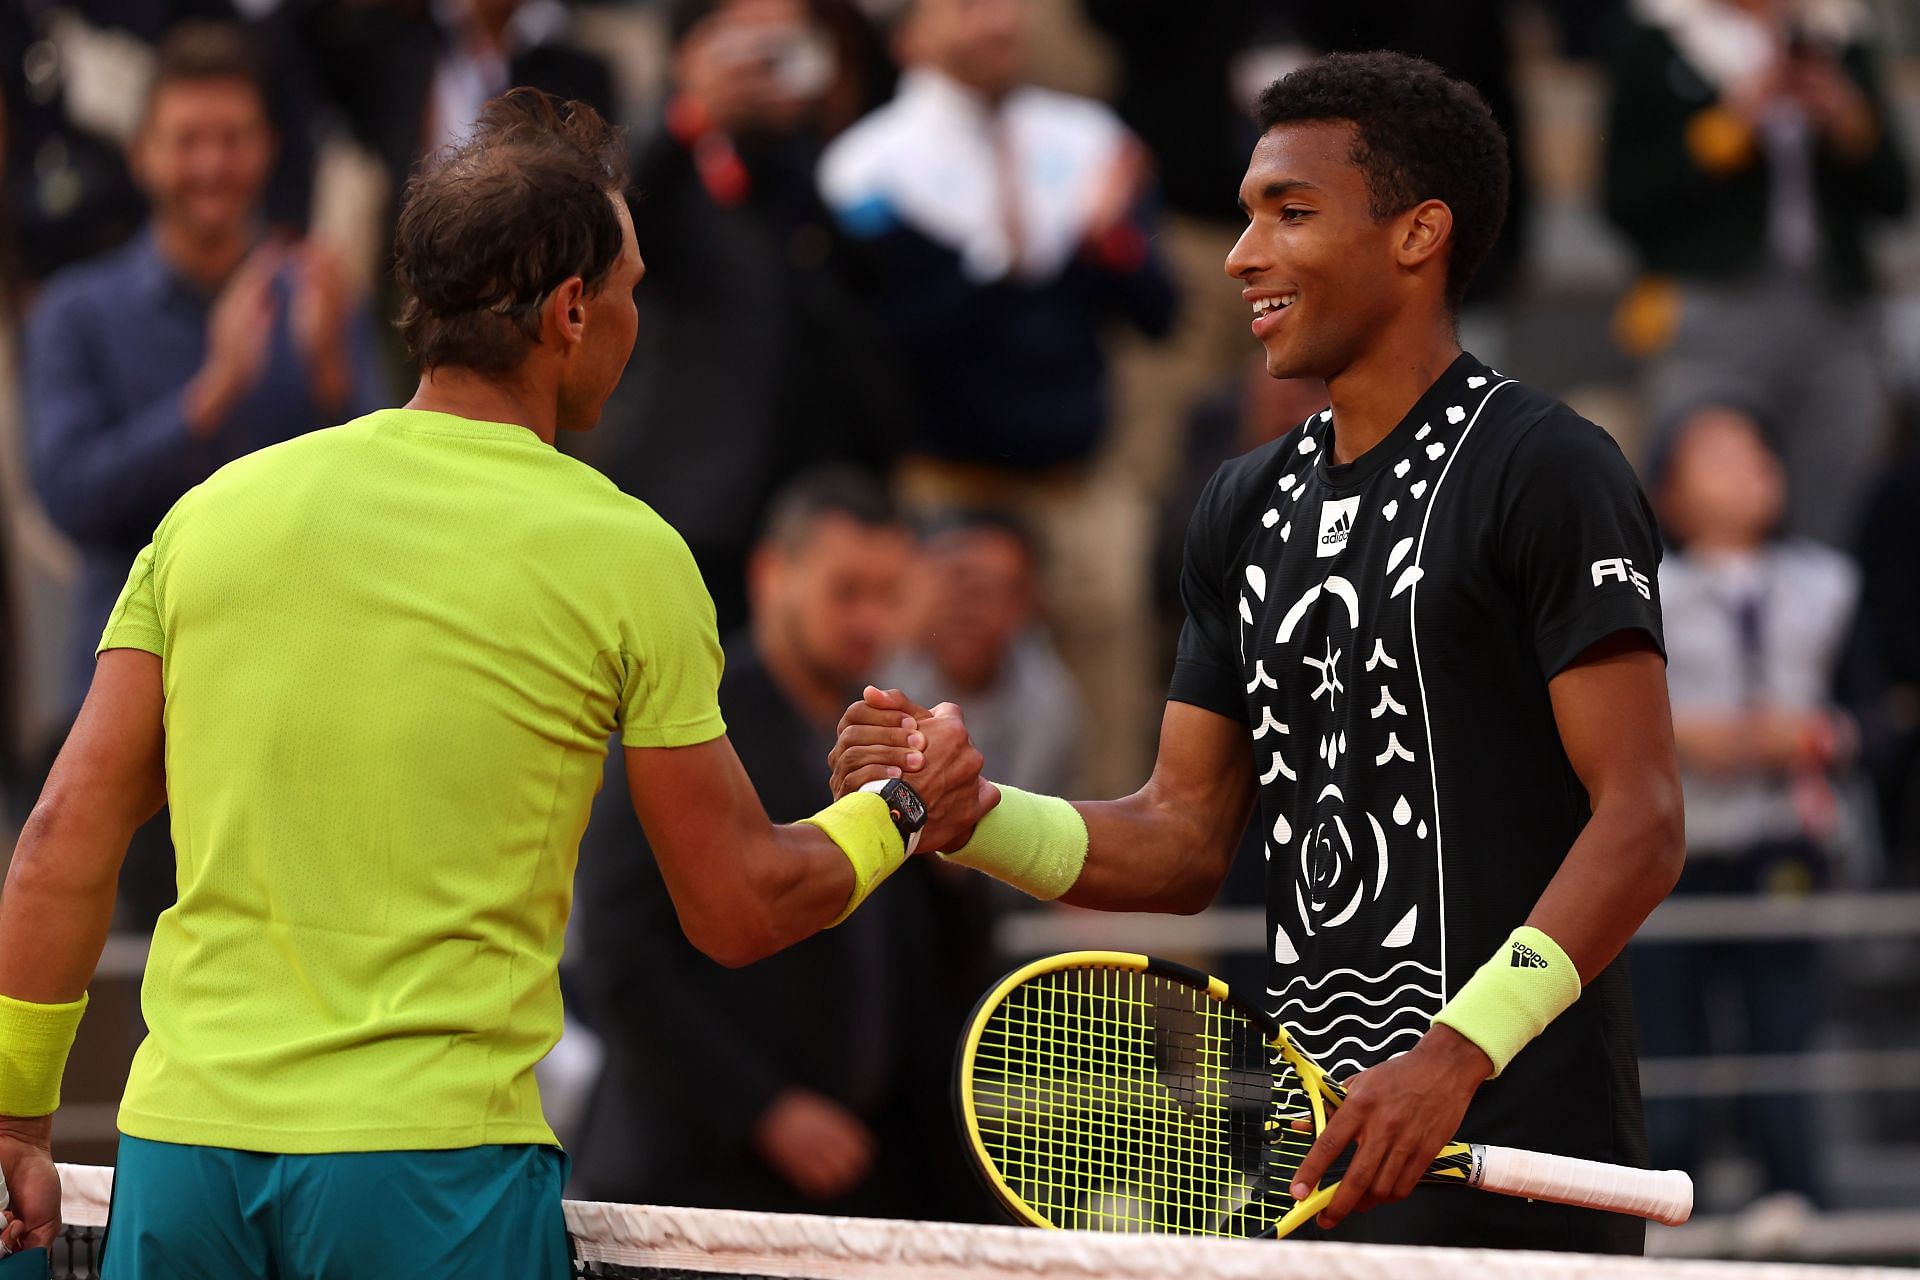 Rafael Nadal and Felix Auger-Aliassime faced each other at the 2022 French Open.